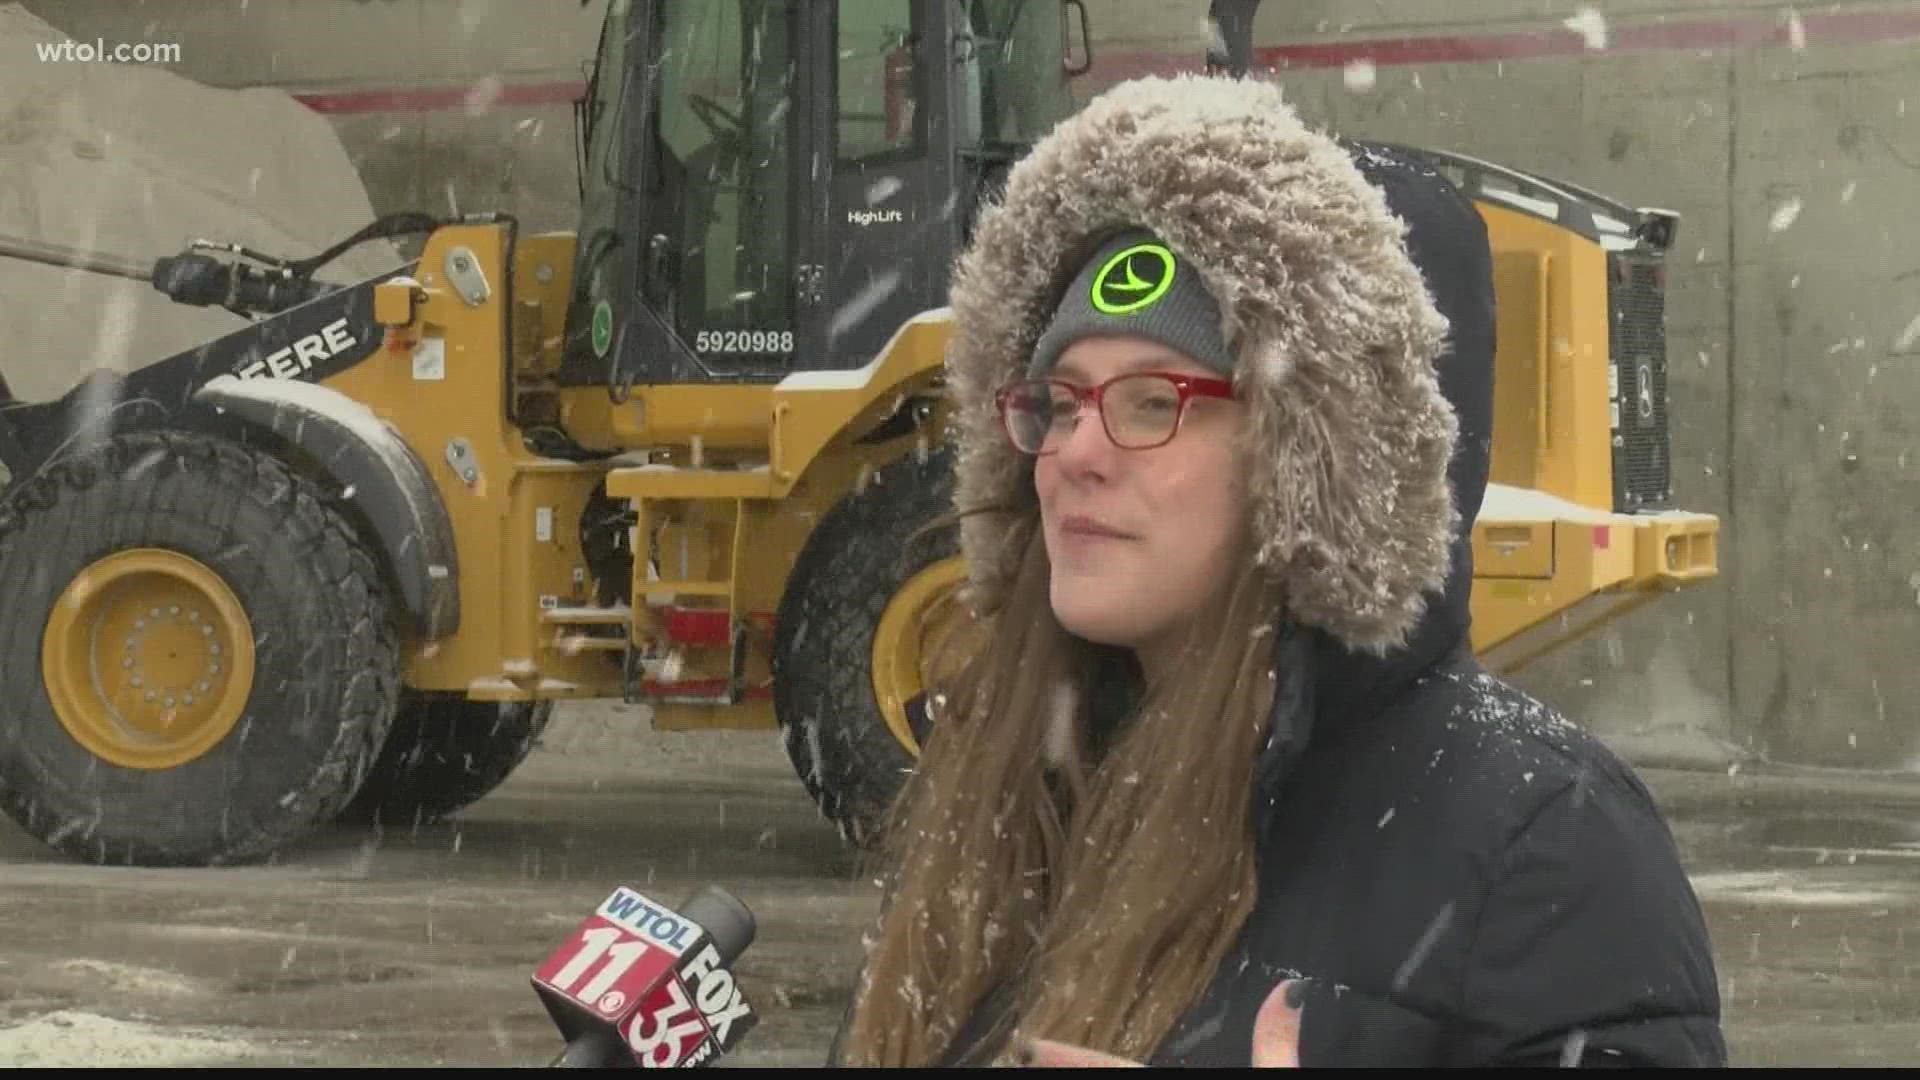 With all the snow ODOT says plow drivers haven't had much of a break